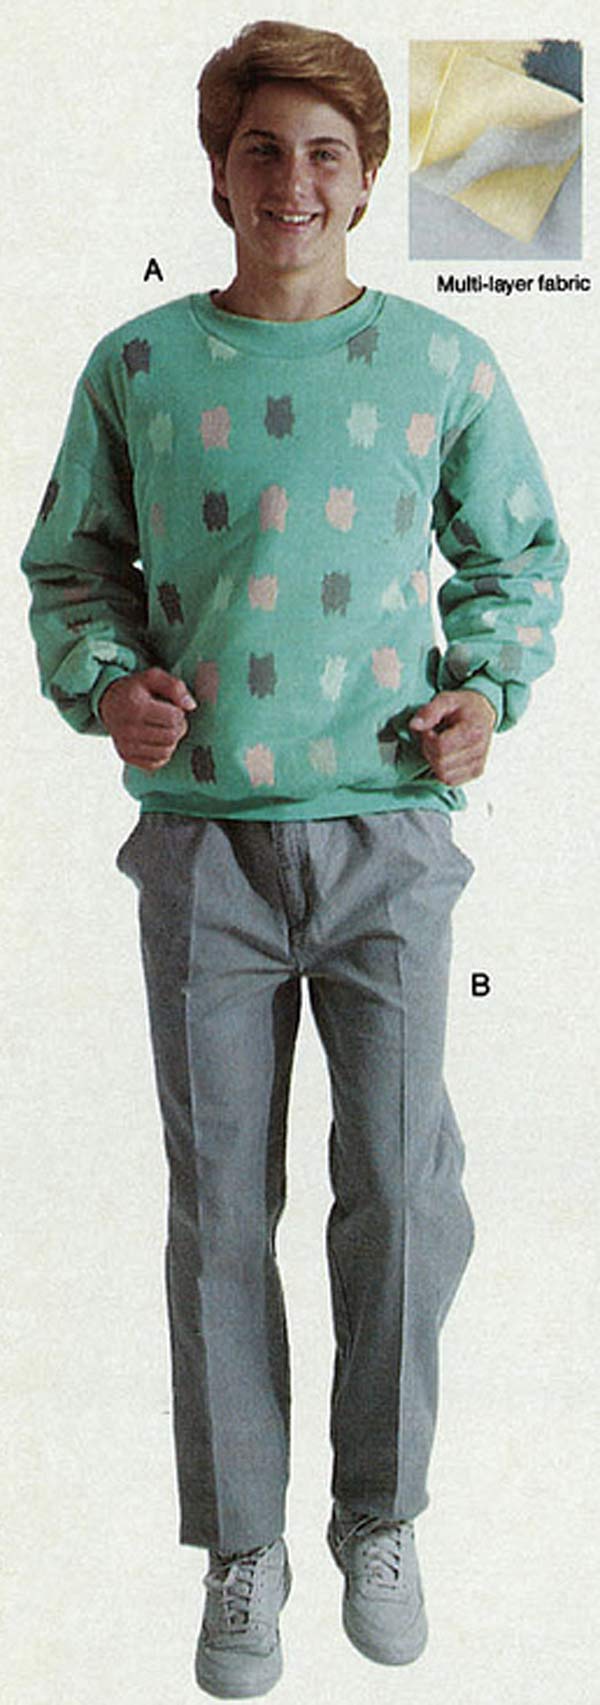 13 Best '80s Fashion Trends for Men | Man of Many